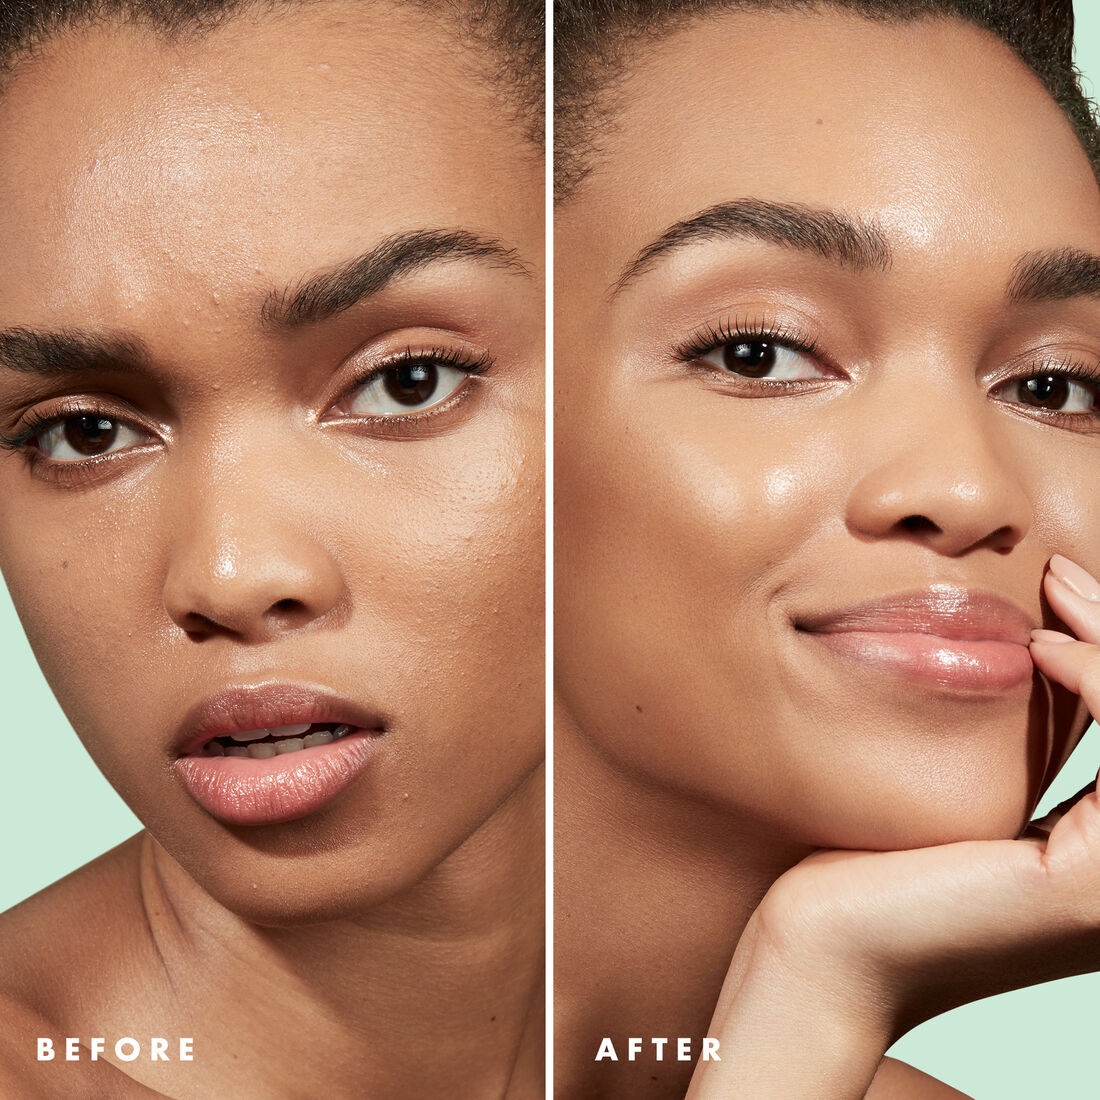 Model's before and after using elf Blemish Control Face Primer